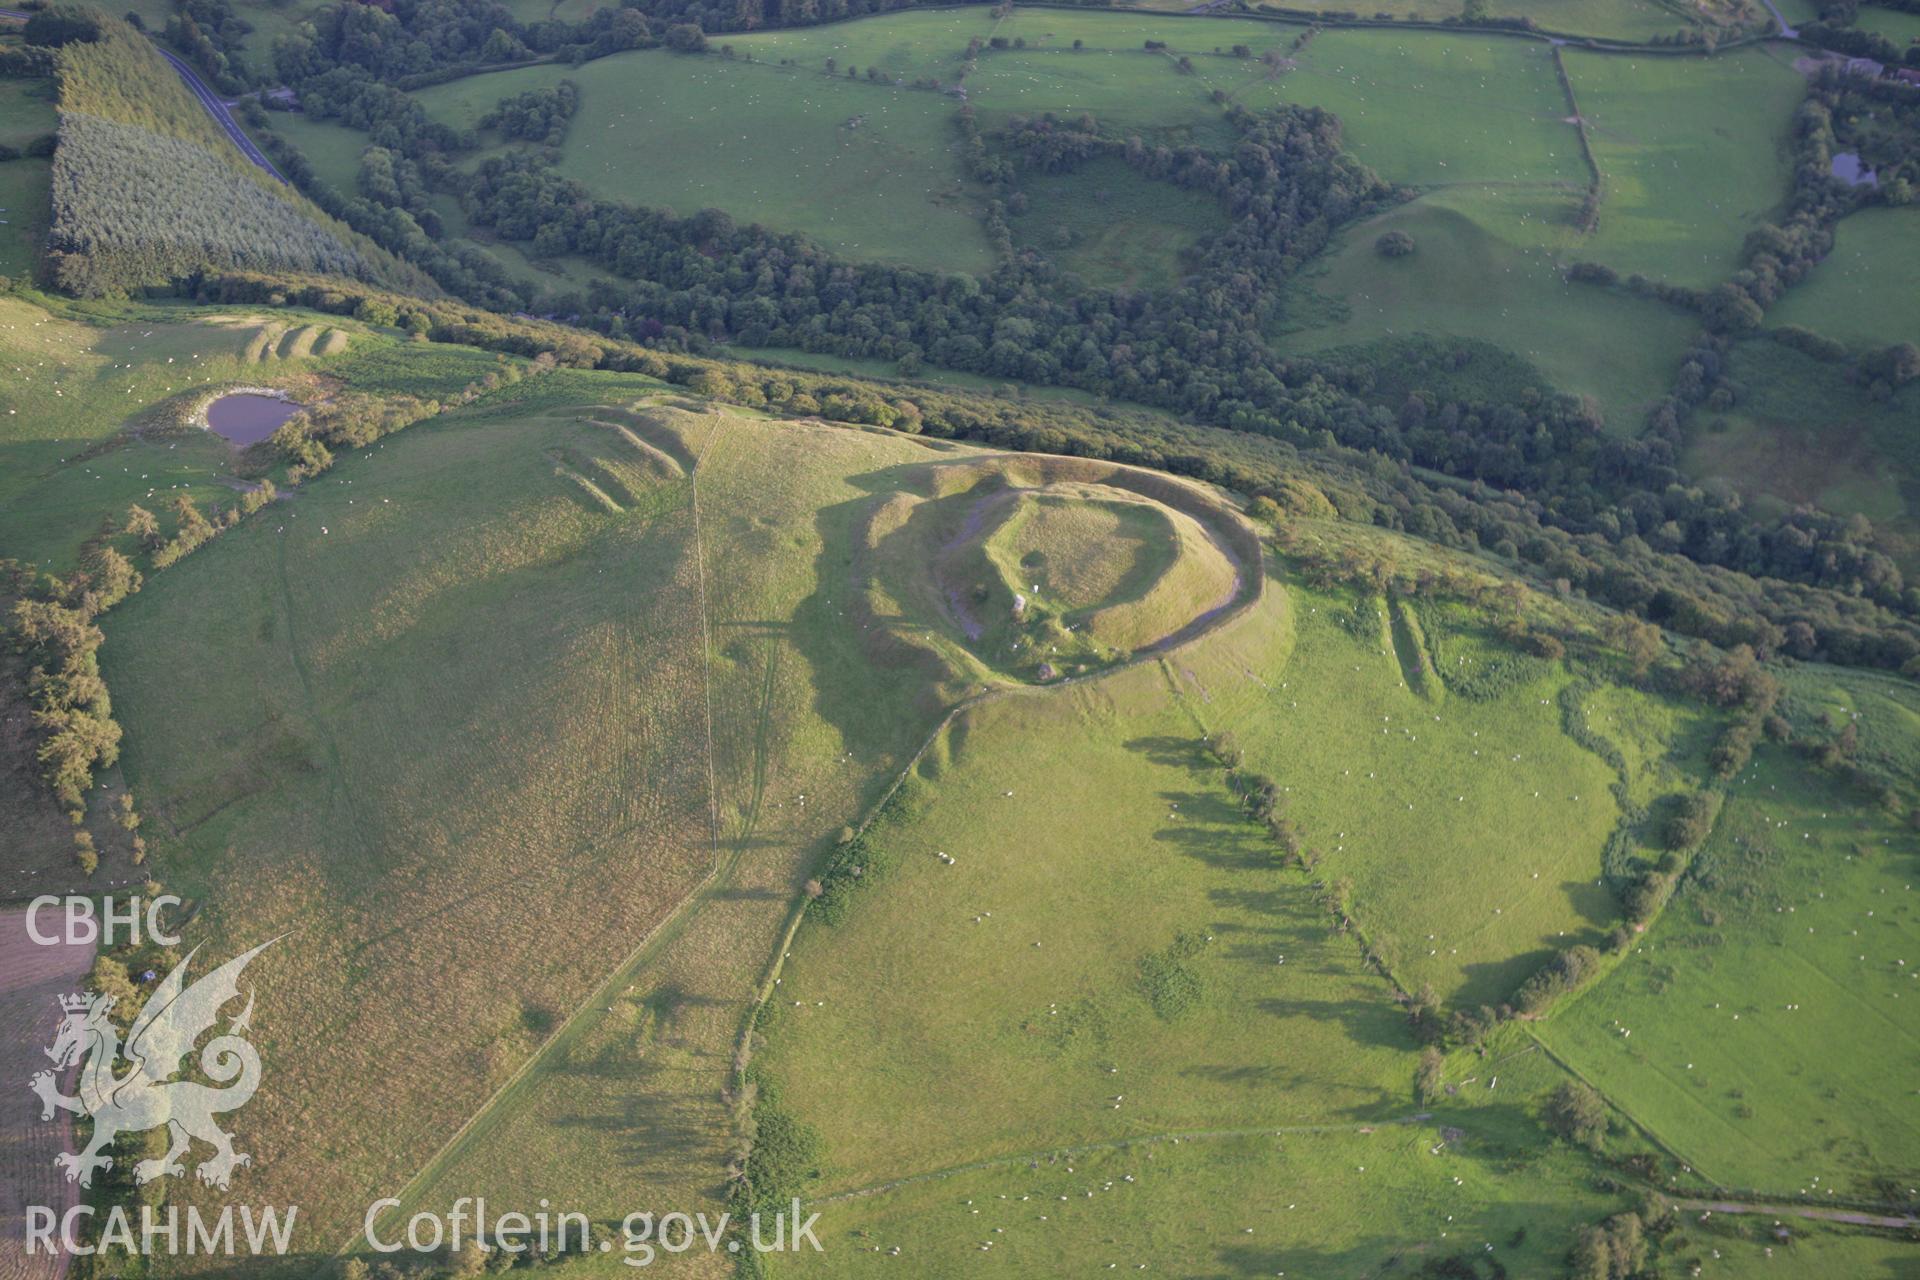 RCAHMW colour oblique aerial photograph of Castell Tinboeth, Llananno. Taken on 08 August 2007 by Toby Driver